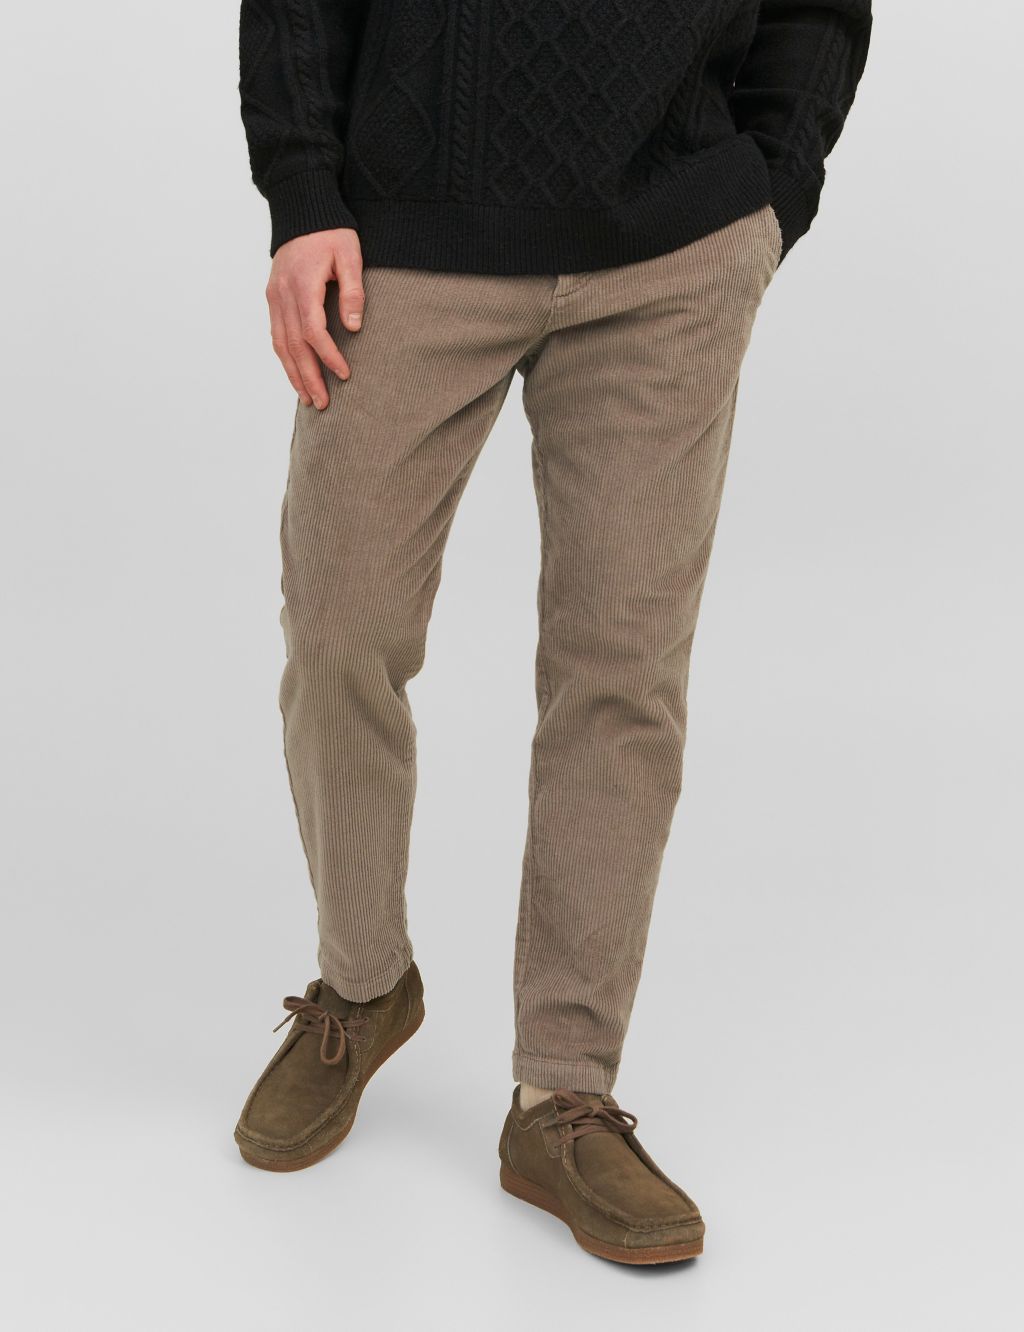 Tapered Fit Corduroy Chinos image 3